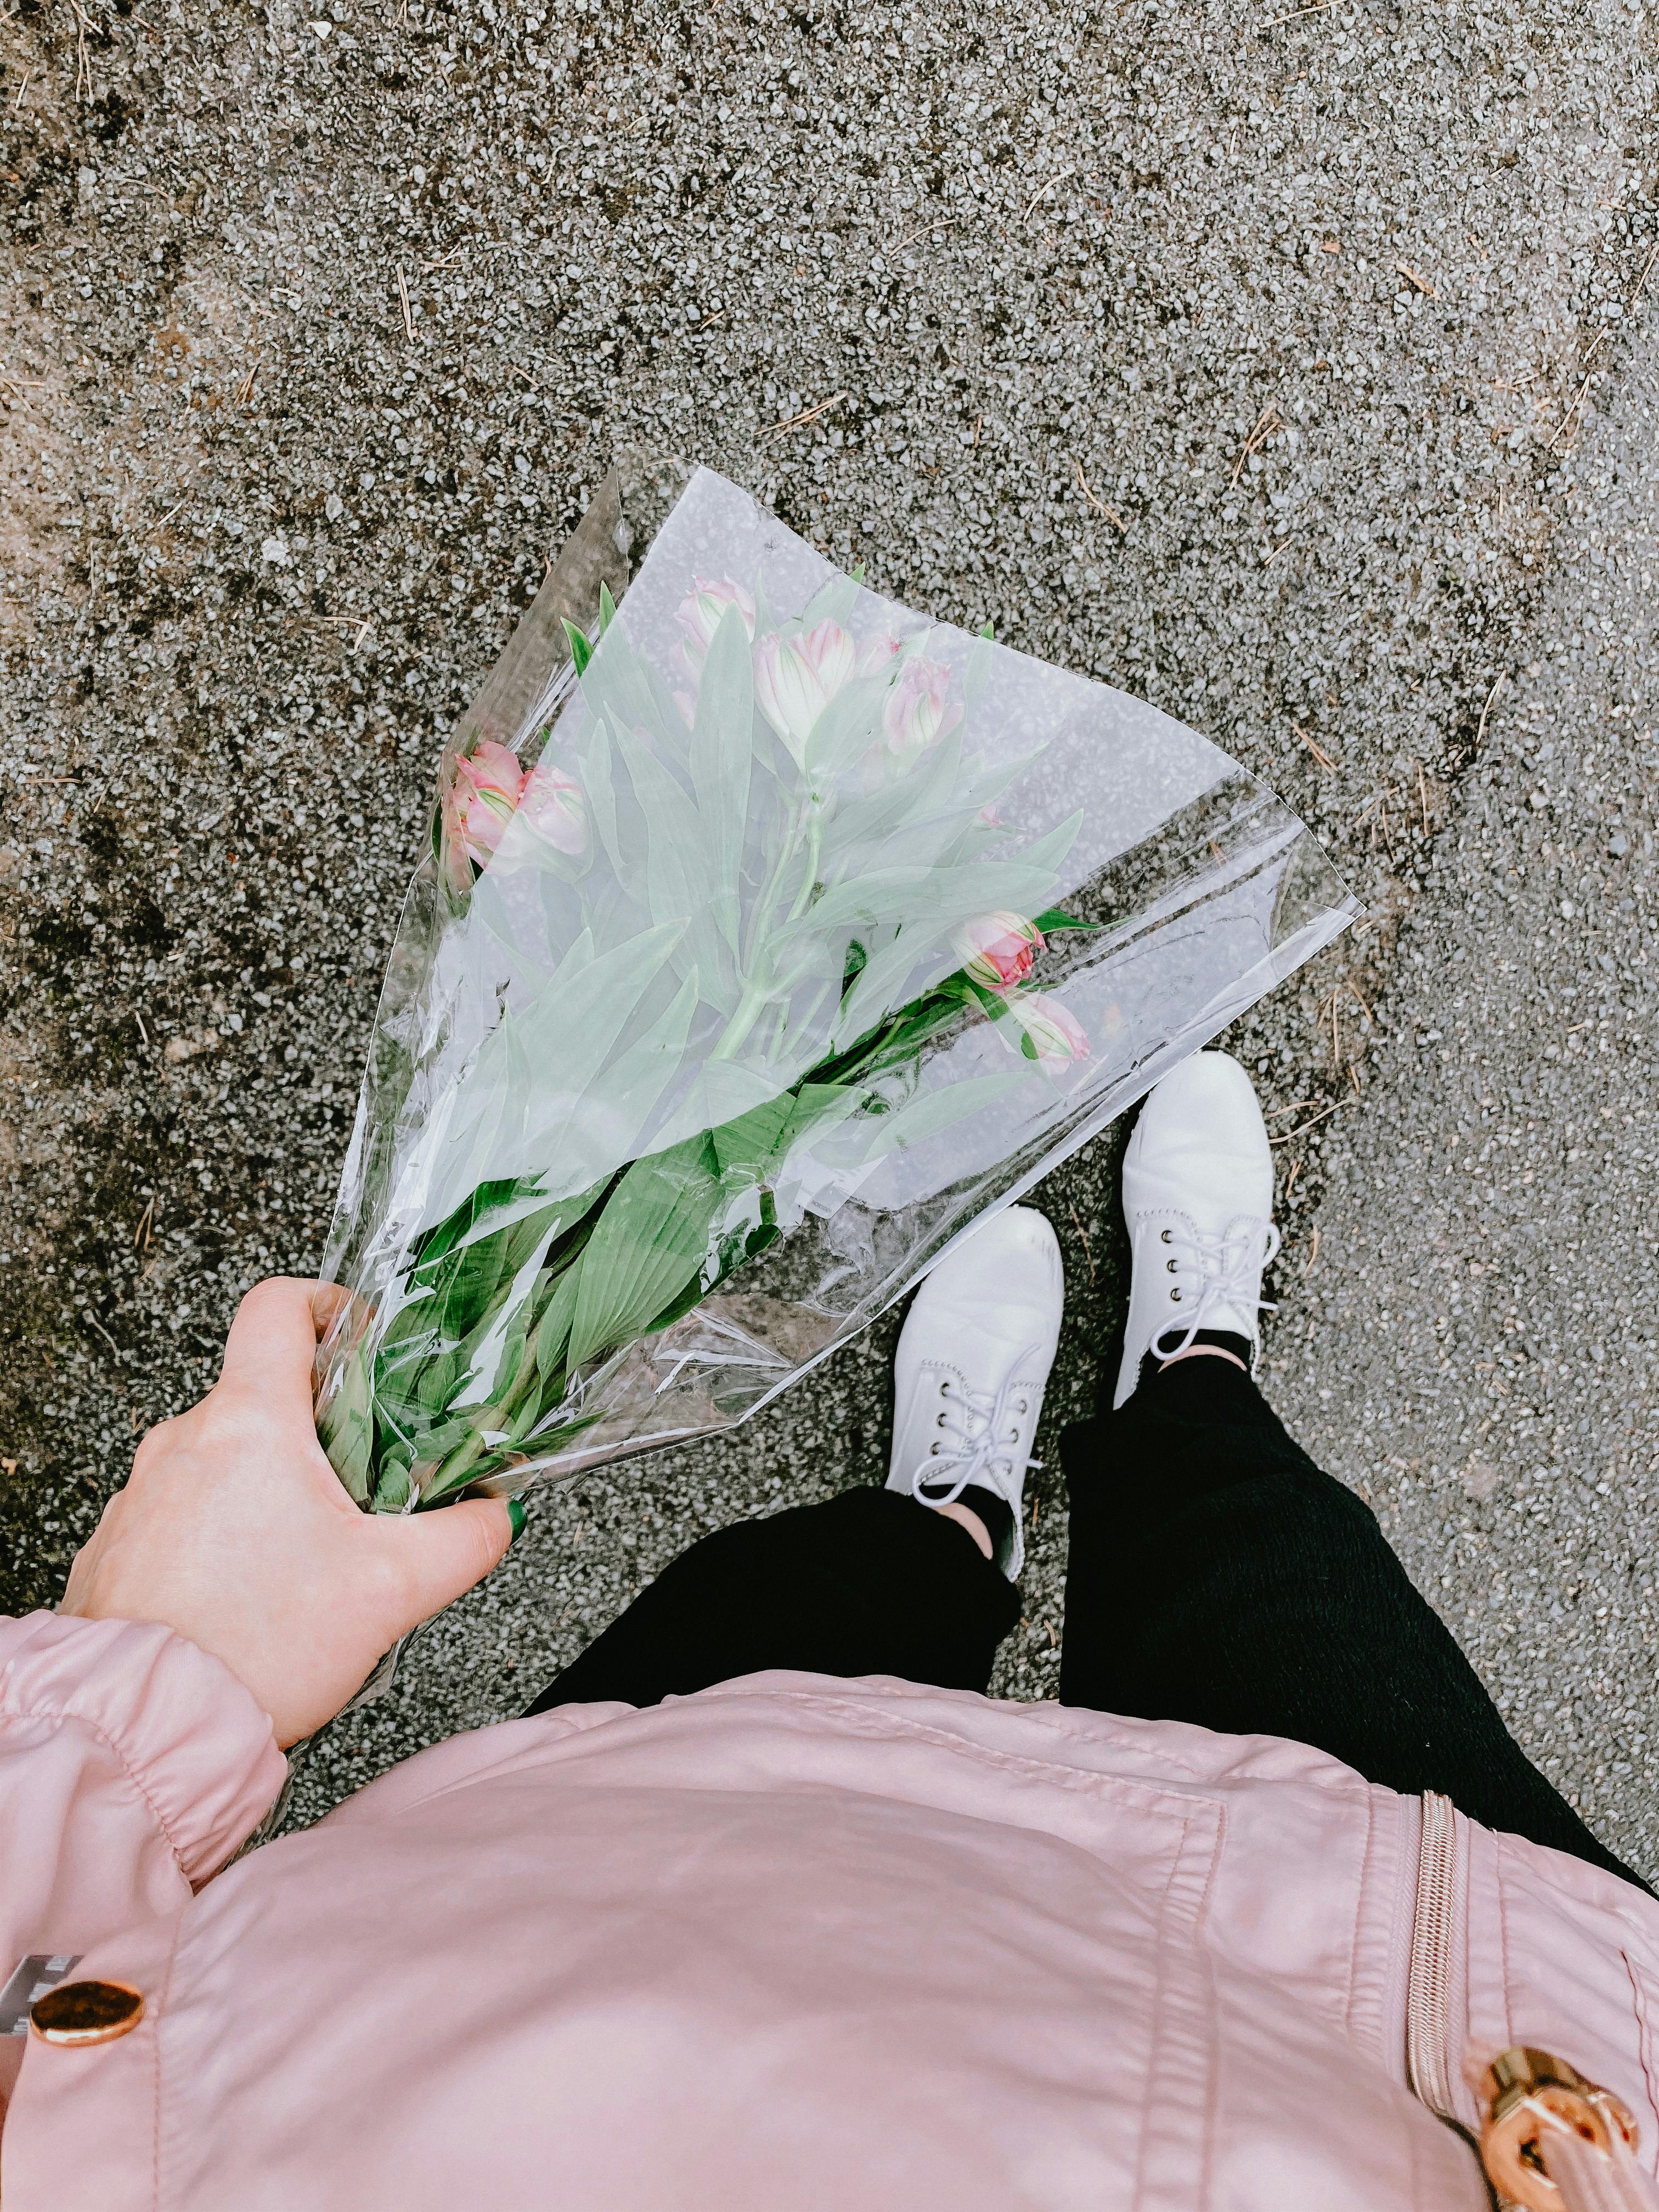 anonymous person holding bouquet of flowers